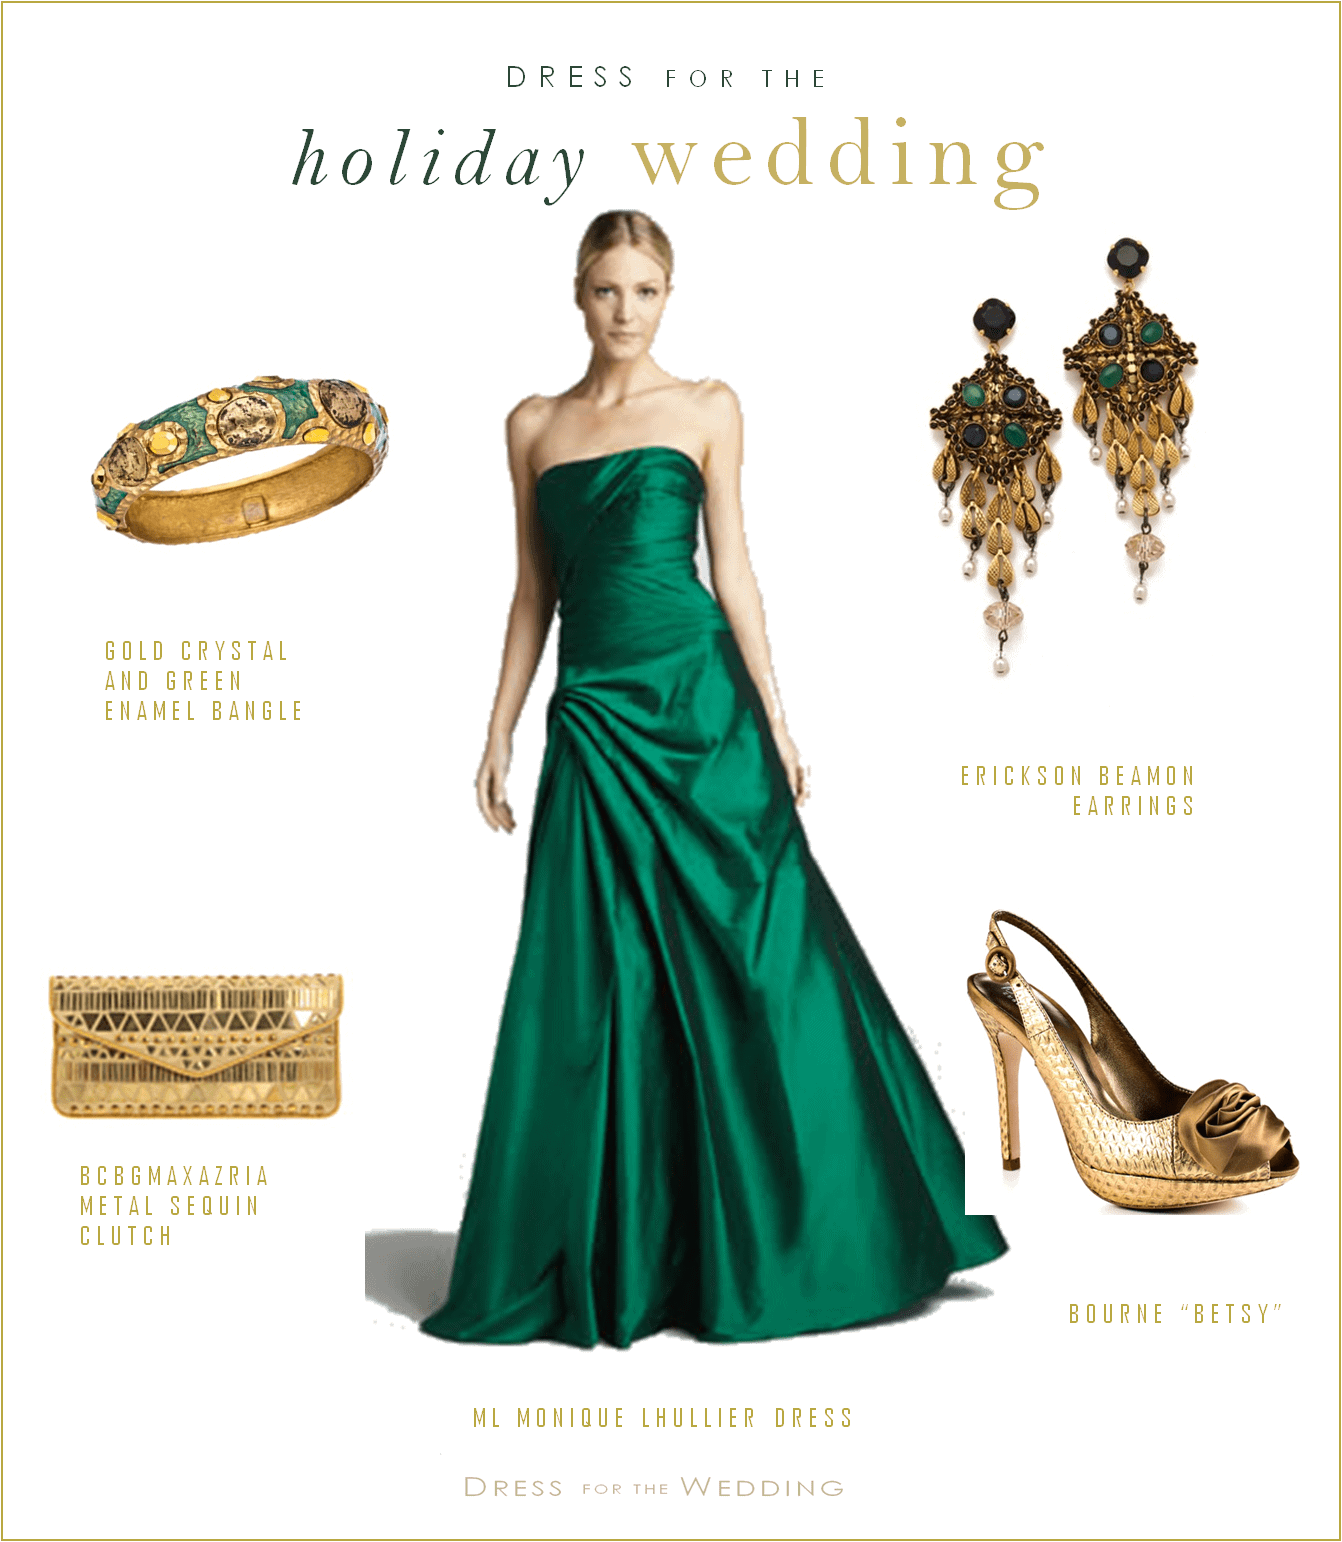 emerald formal gowns